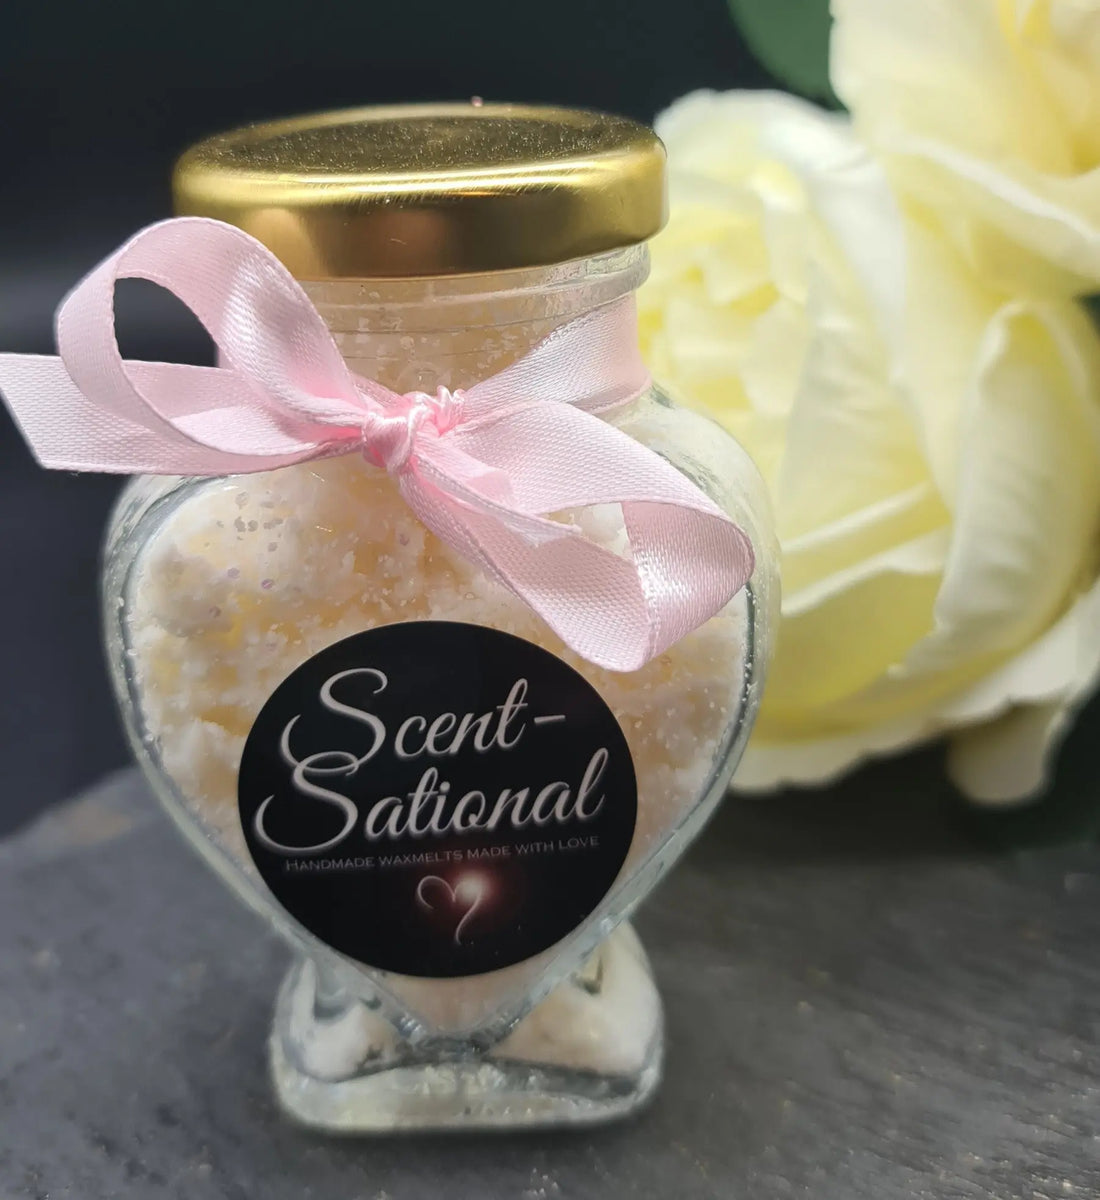 Are wax melts worth it ? Scent Sational Wax melts